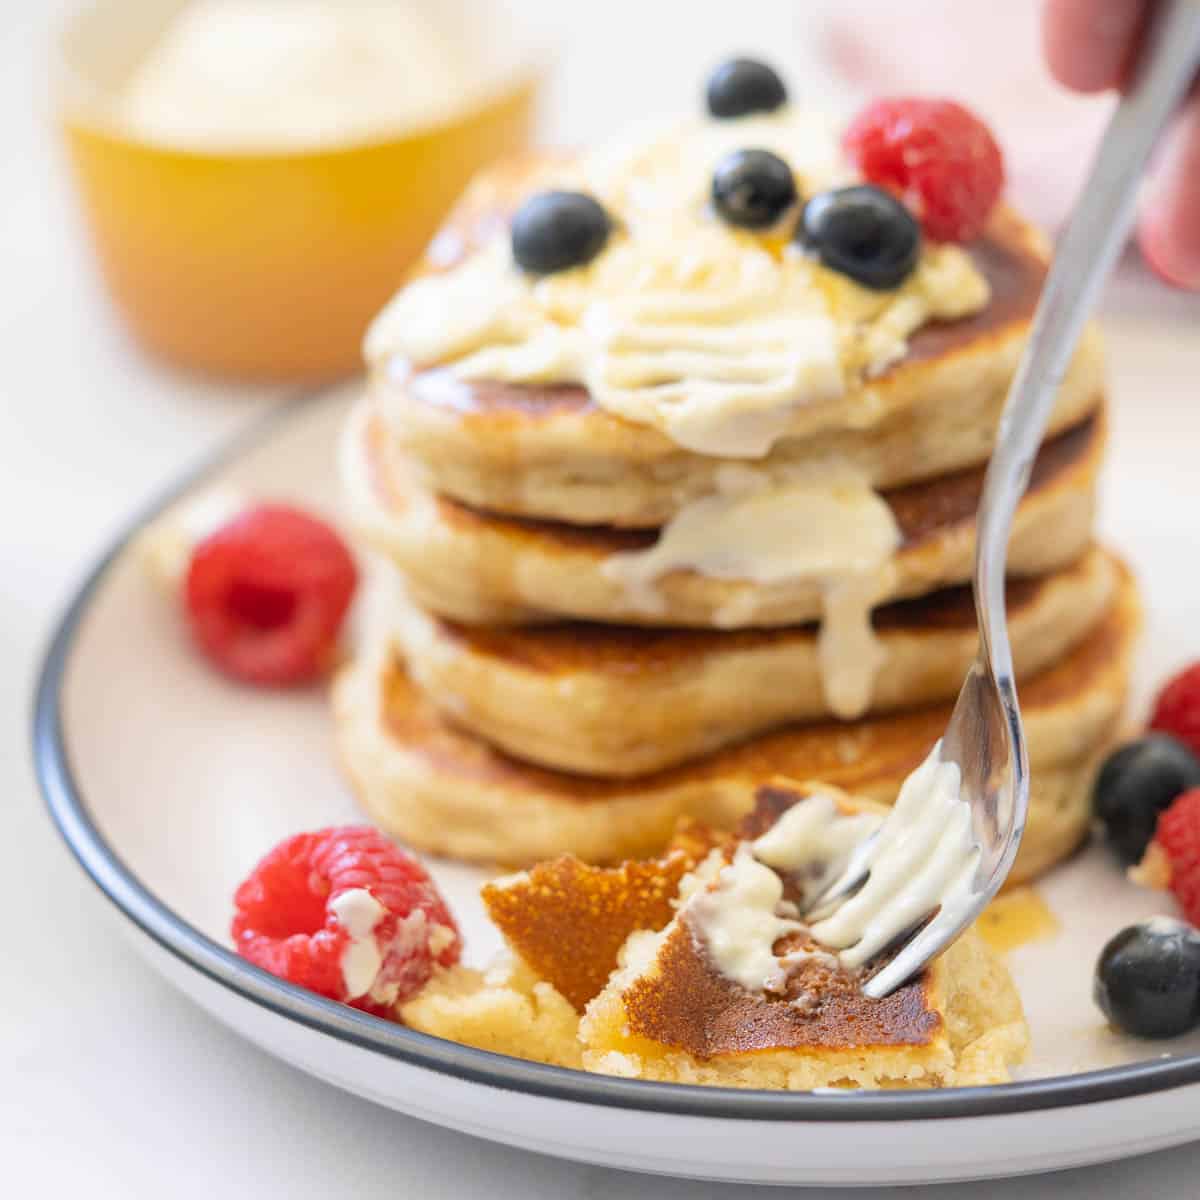 A fork taking a forkfull of pancakes, berries and yoghurt in front of a stack of pancakes.